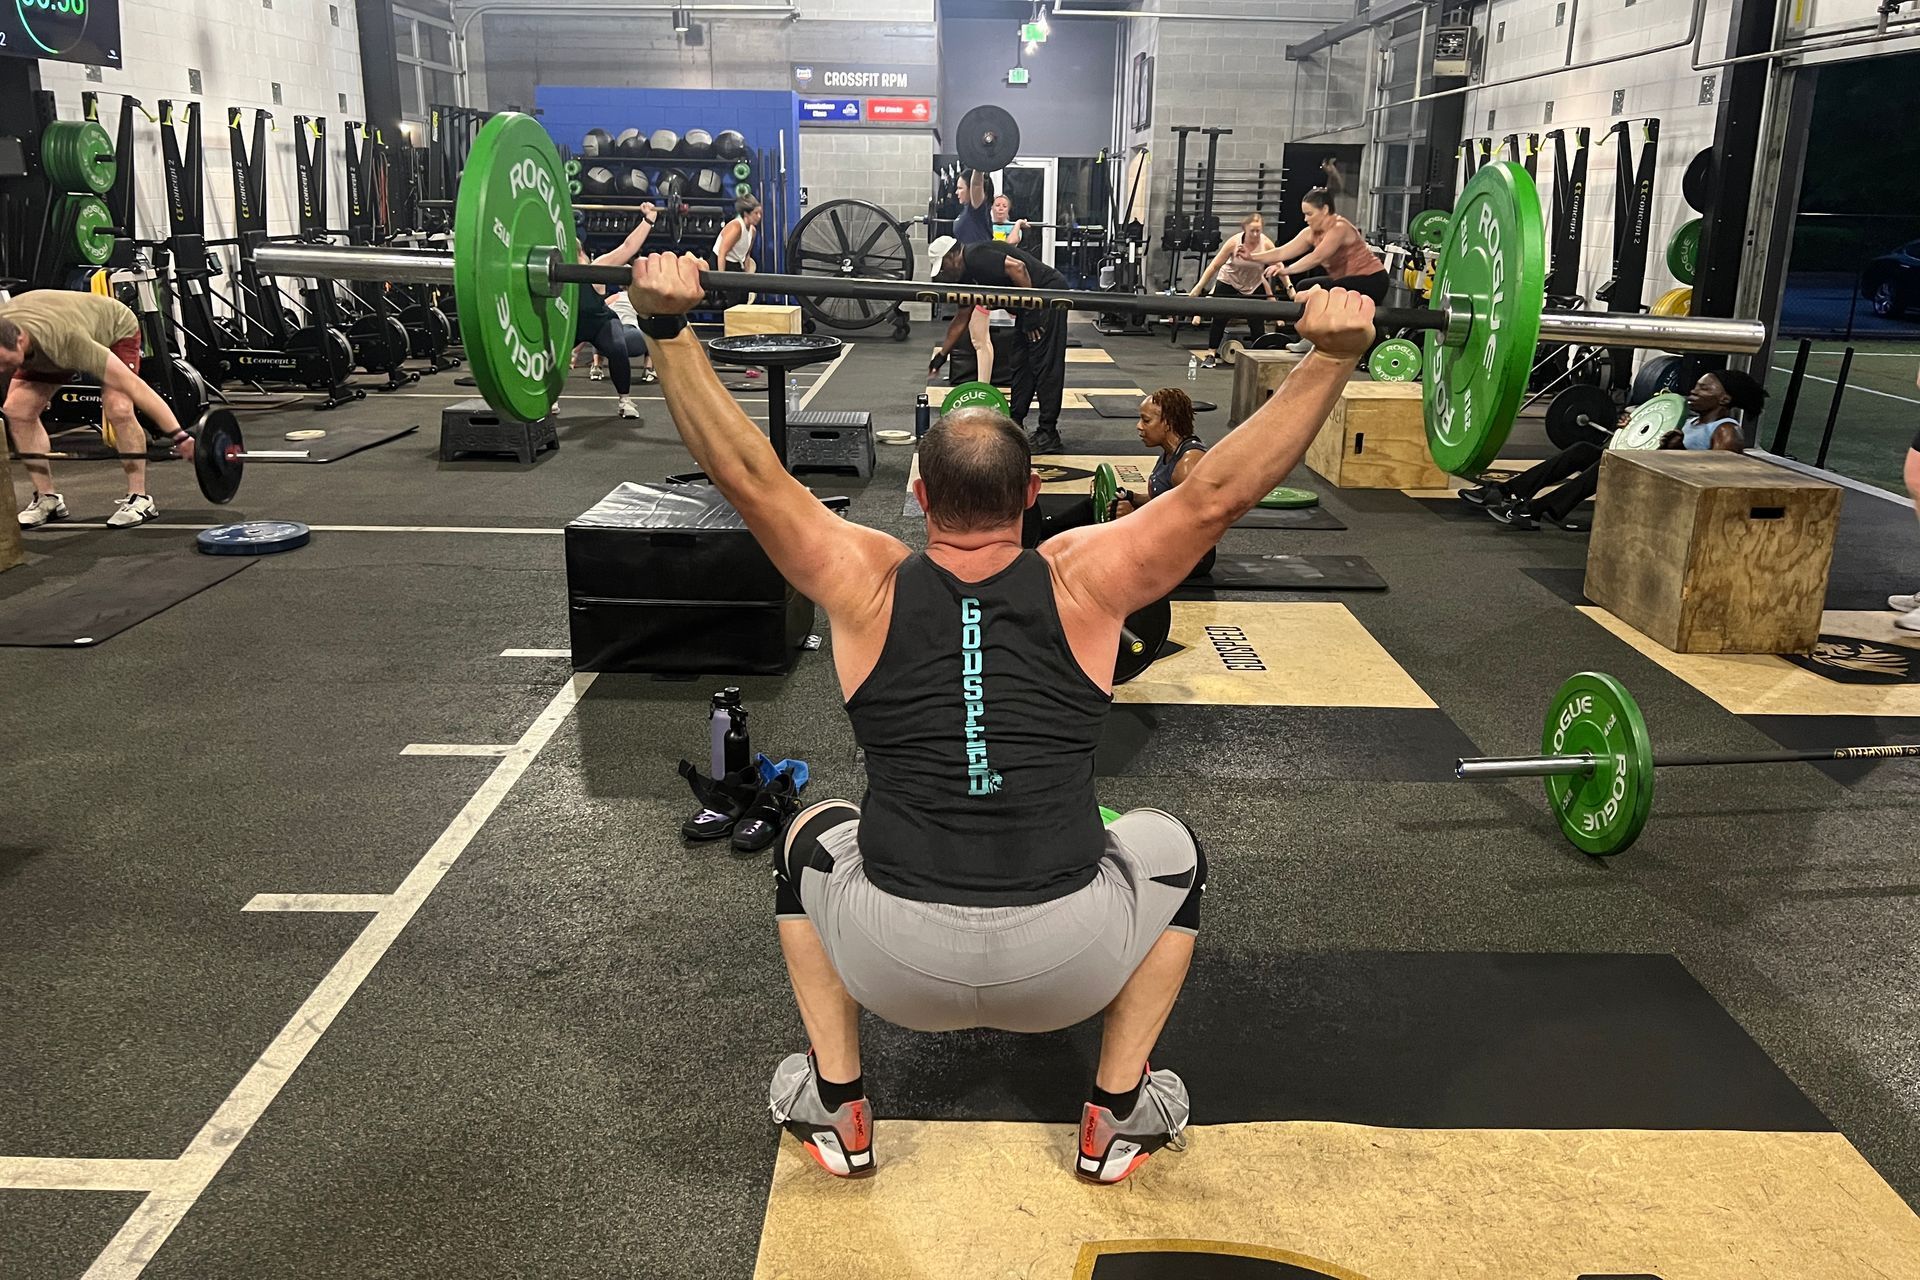 A man is squatting with a barbell over his head in a gym.